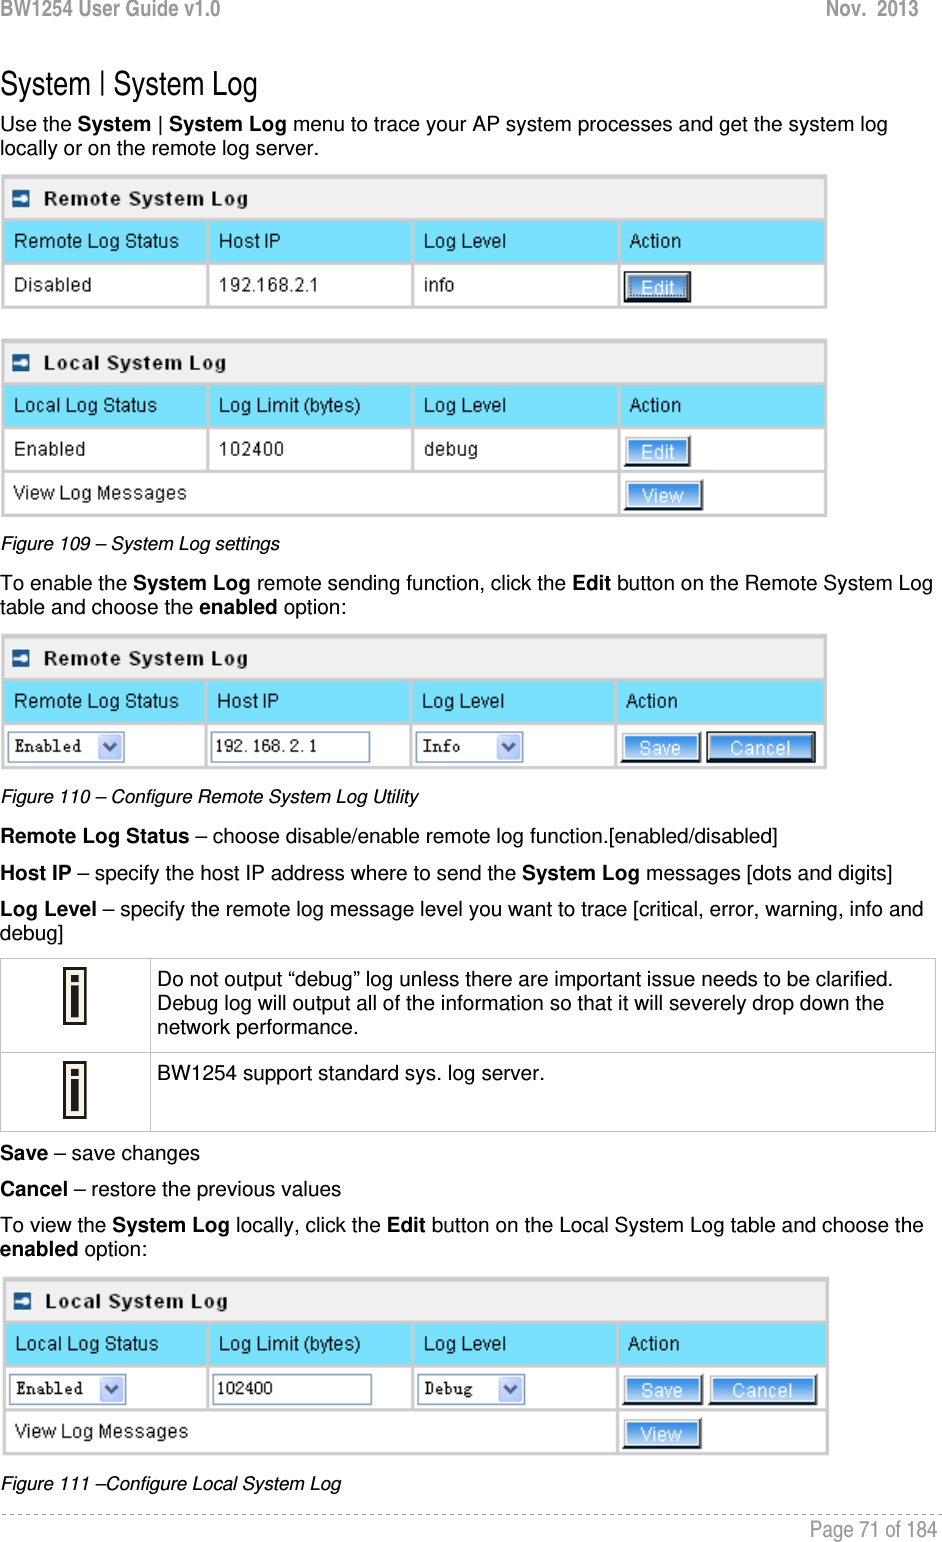 BW1254 User Guide v1.0  Nov.  2013     Page 71 of 184   System | System Log Use the System | System Log menu to trace your AP system processes and get the system log locally or on the remote log server.   Figure 109 – System Log settings To enable the System Log remote sending function, click the Edit button on the Remote System Log table and choose the enabled option:  Figure 110 – Configure Remote System Log Utility Remote Log Status – choose disable/enable remote log function.[enabled/disabled] Host IP – specify the host IP address where to send the System Log messages [dots and digits] Log Level – specify the remote log message level you want to trace [critical, error, warning, info and debug]  Do not output “debug” log unless there are important issue needs to be clarified. Debug log will output all of the information so that it will severely drop down the network performance.  BW1254 support standard sys. log server. Save – save changes Cancel – restore the previous values To view the System Log locally, click the Edit button on the Local System Log table and choose the enabled option:  Figure 111 –Configure Local System Log 